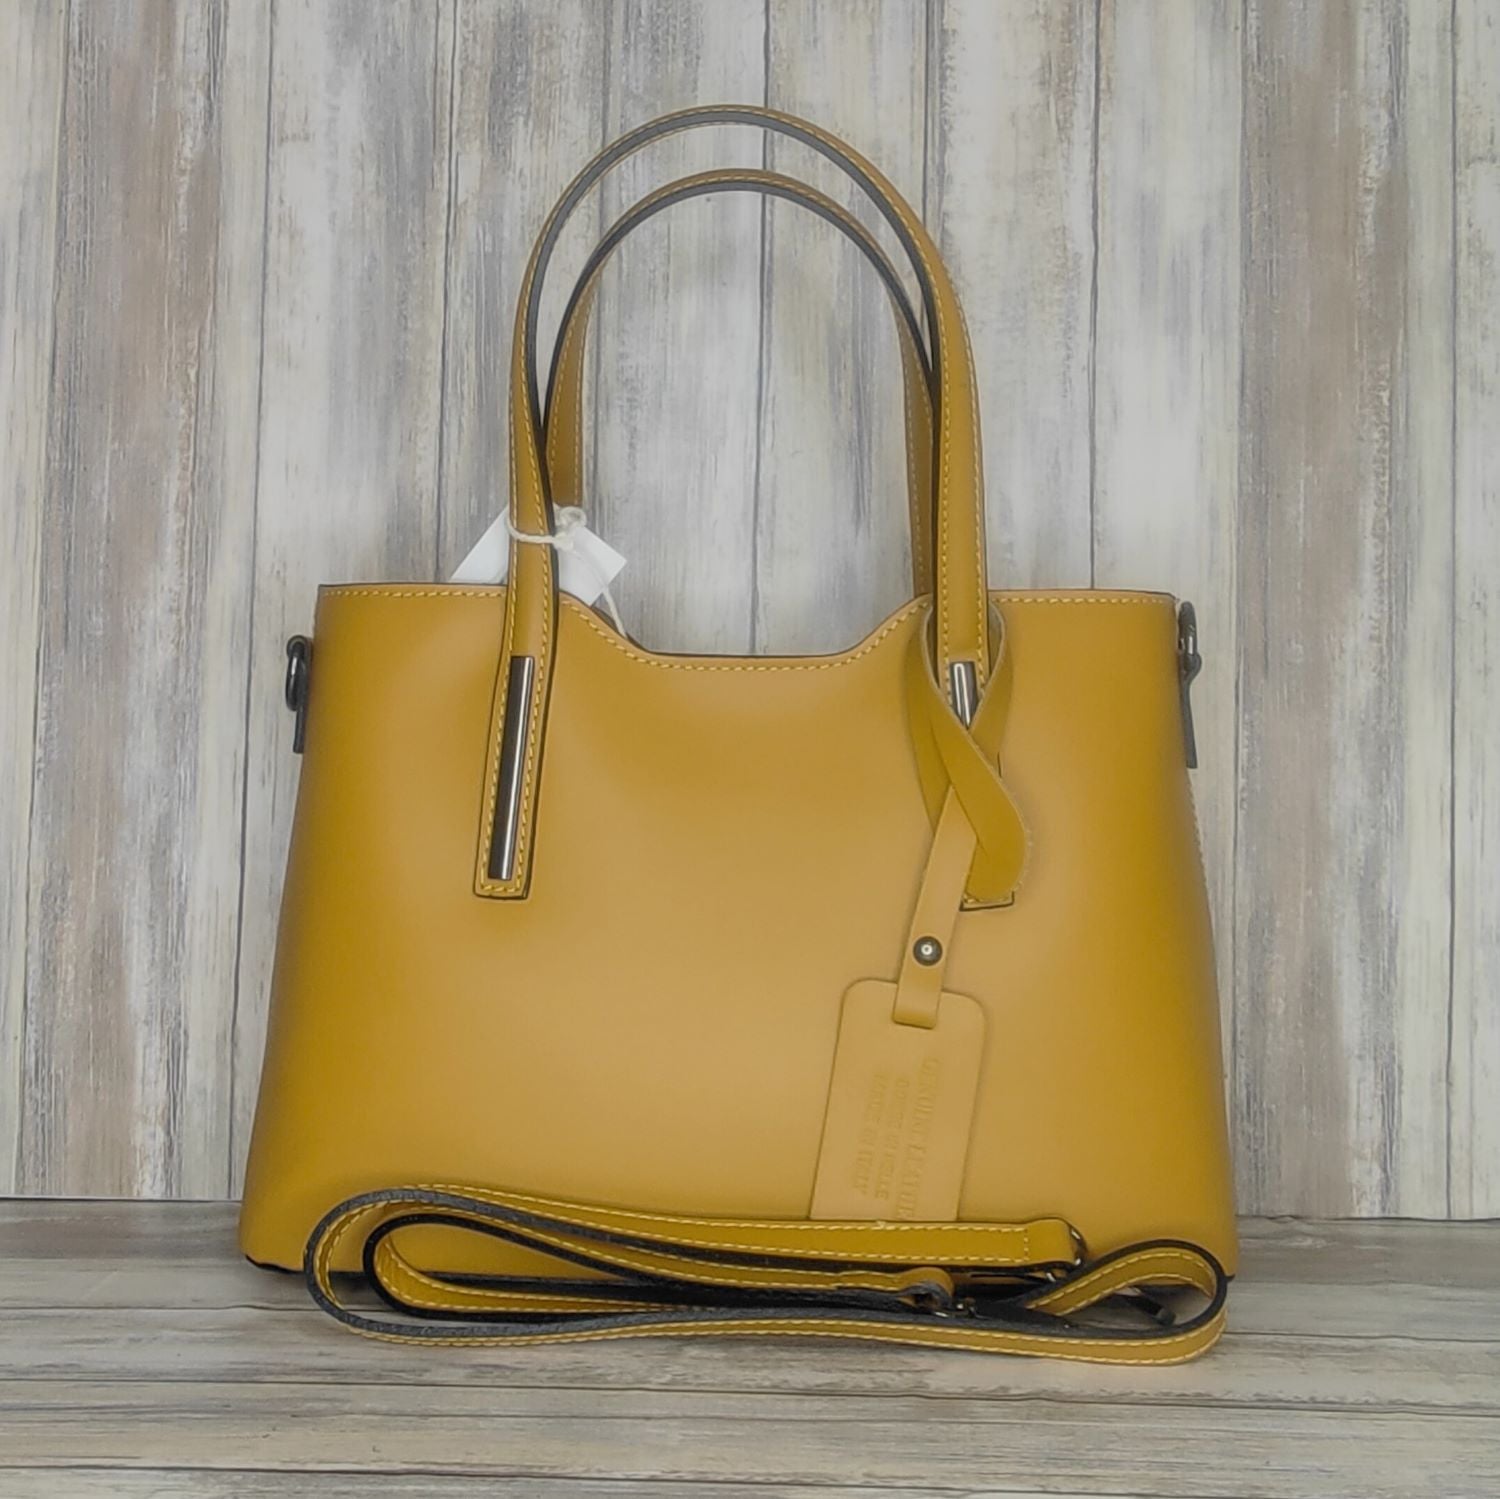 Elevate your style with this stunning Italian leather double compartment handbag.  Its soft yet structured design looks beautiful and feels equally beautiful to wear. This is a classic design that will match with any outfit and is the perfect size for all your essential items. Get ready to make a statement with this fashionable and functional addition to your wardrobe.  We love this bag!